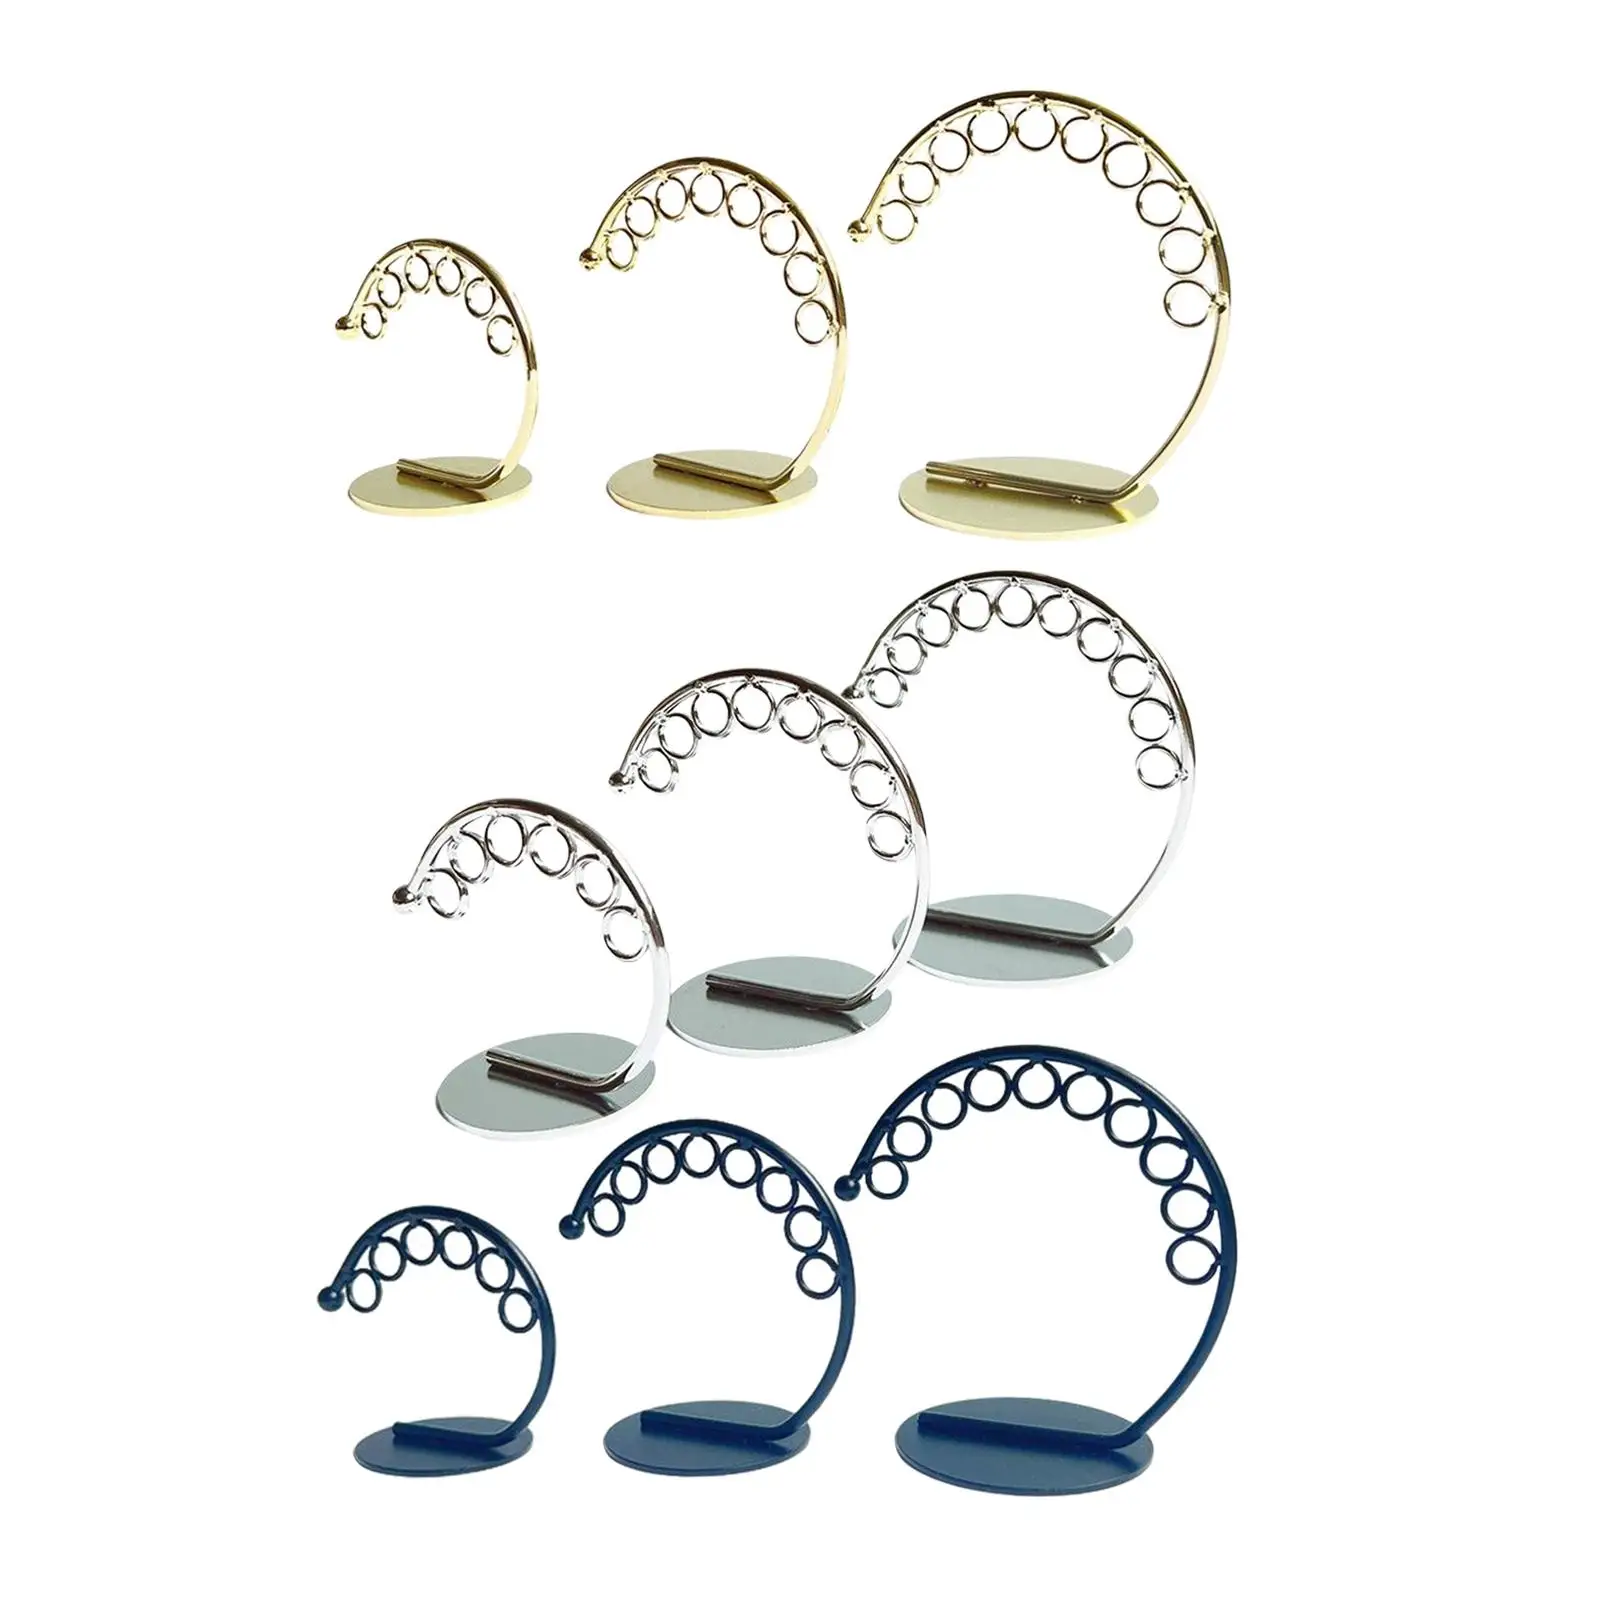 3 Pieces Metal Earring Stand Earring Shelf Rack Jewelry Organizer Jewelry Stand Stud Earring Display Holder for Showroom Retail